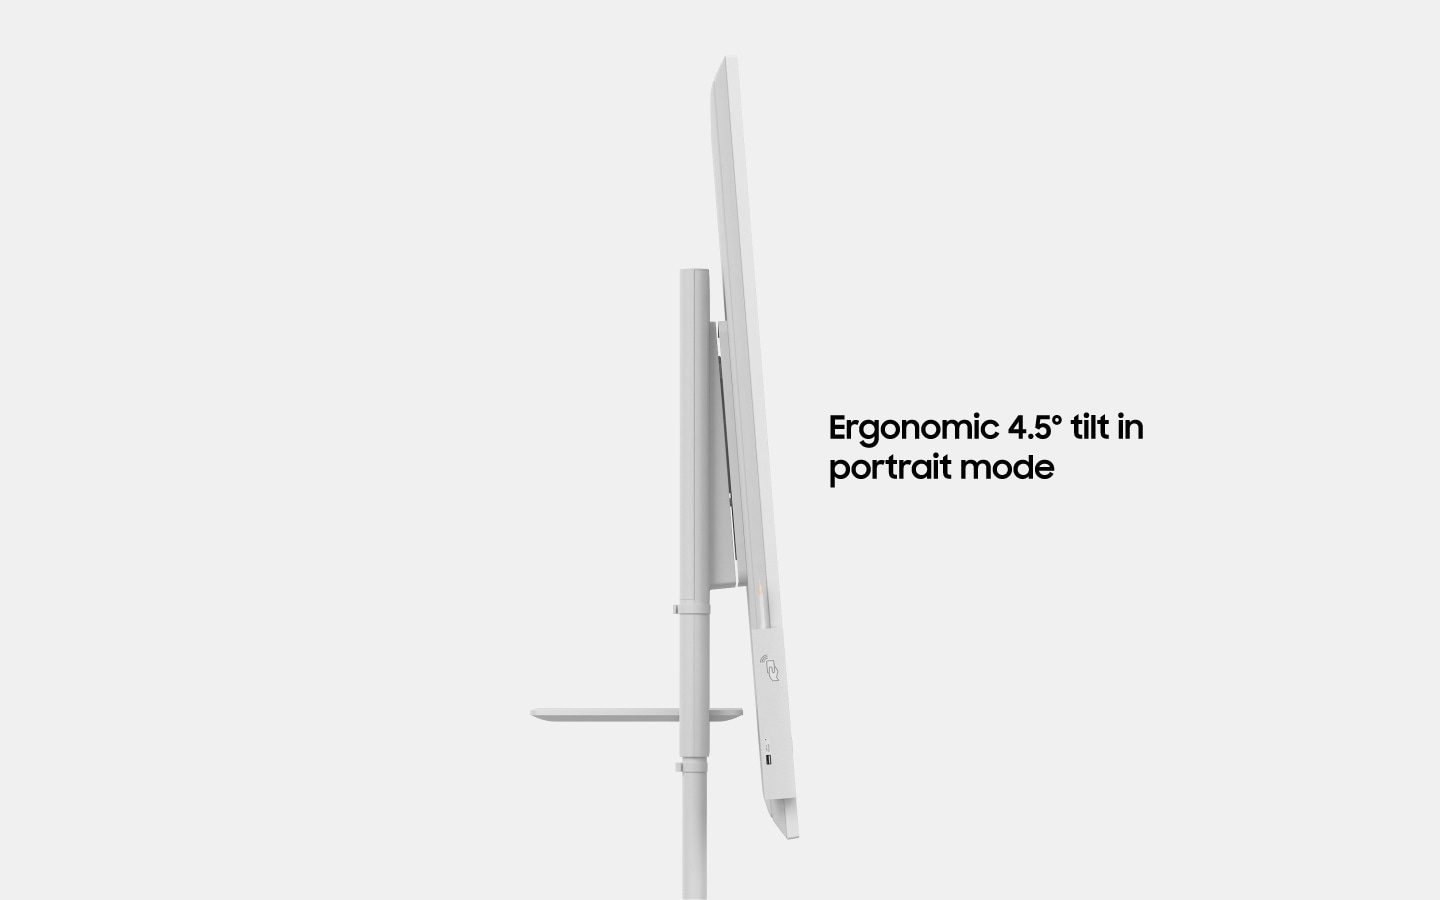 An image showing the side of a Samsung Flip device with text that reads "Ergonomic 4.5° tilt in portrait mode" (6-1).